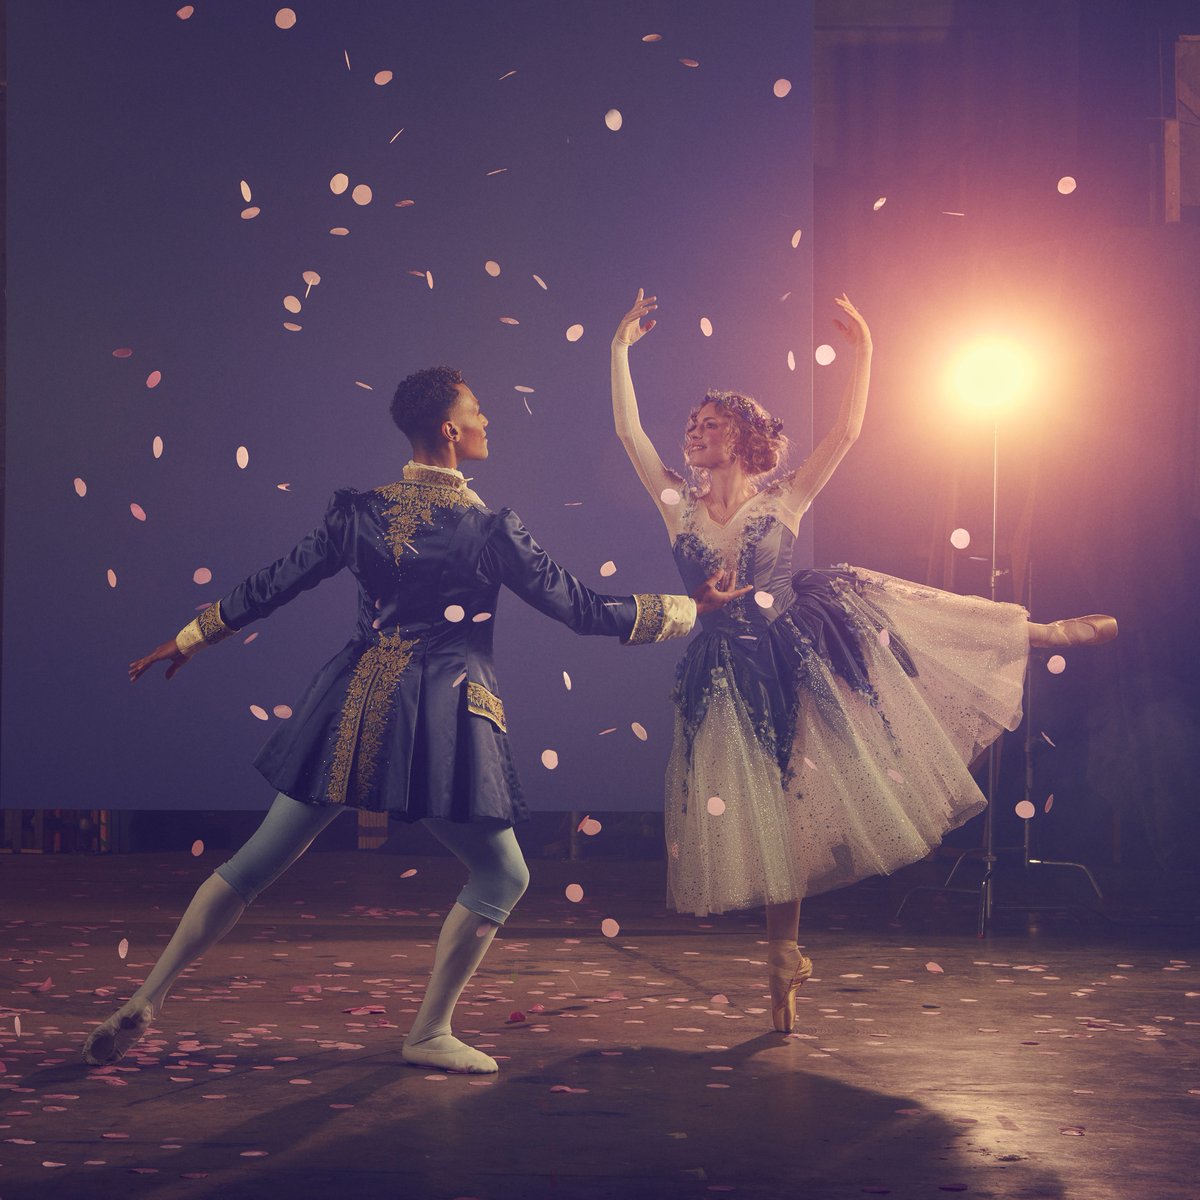 Our enchanting production Cinders is everything you adore about the classic fairy tale – made sparkling, fresh and new. Choreographed by @HampsonChris with new designs by @_elinsteele and Prokofiev’s melodic score performed live by SB Orchestra: bit.ly/45HlVS4
#SBCinders